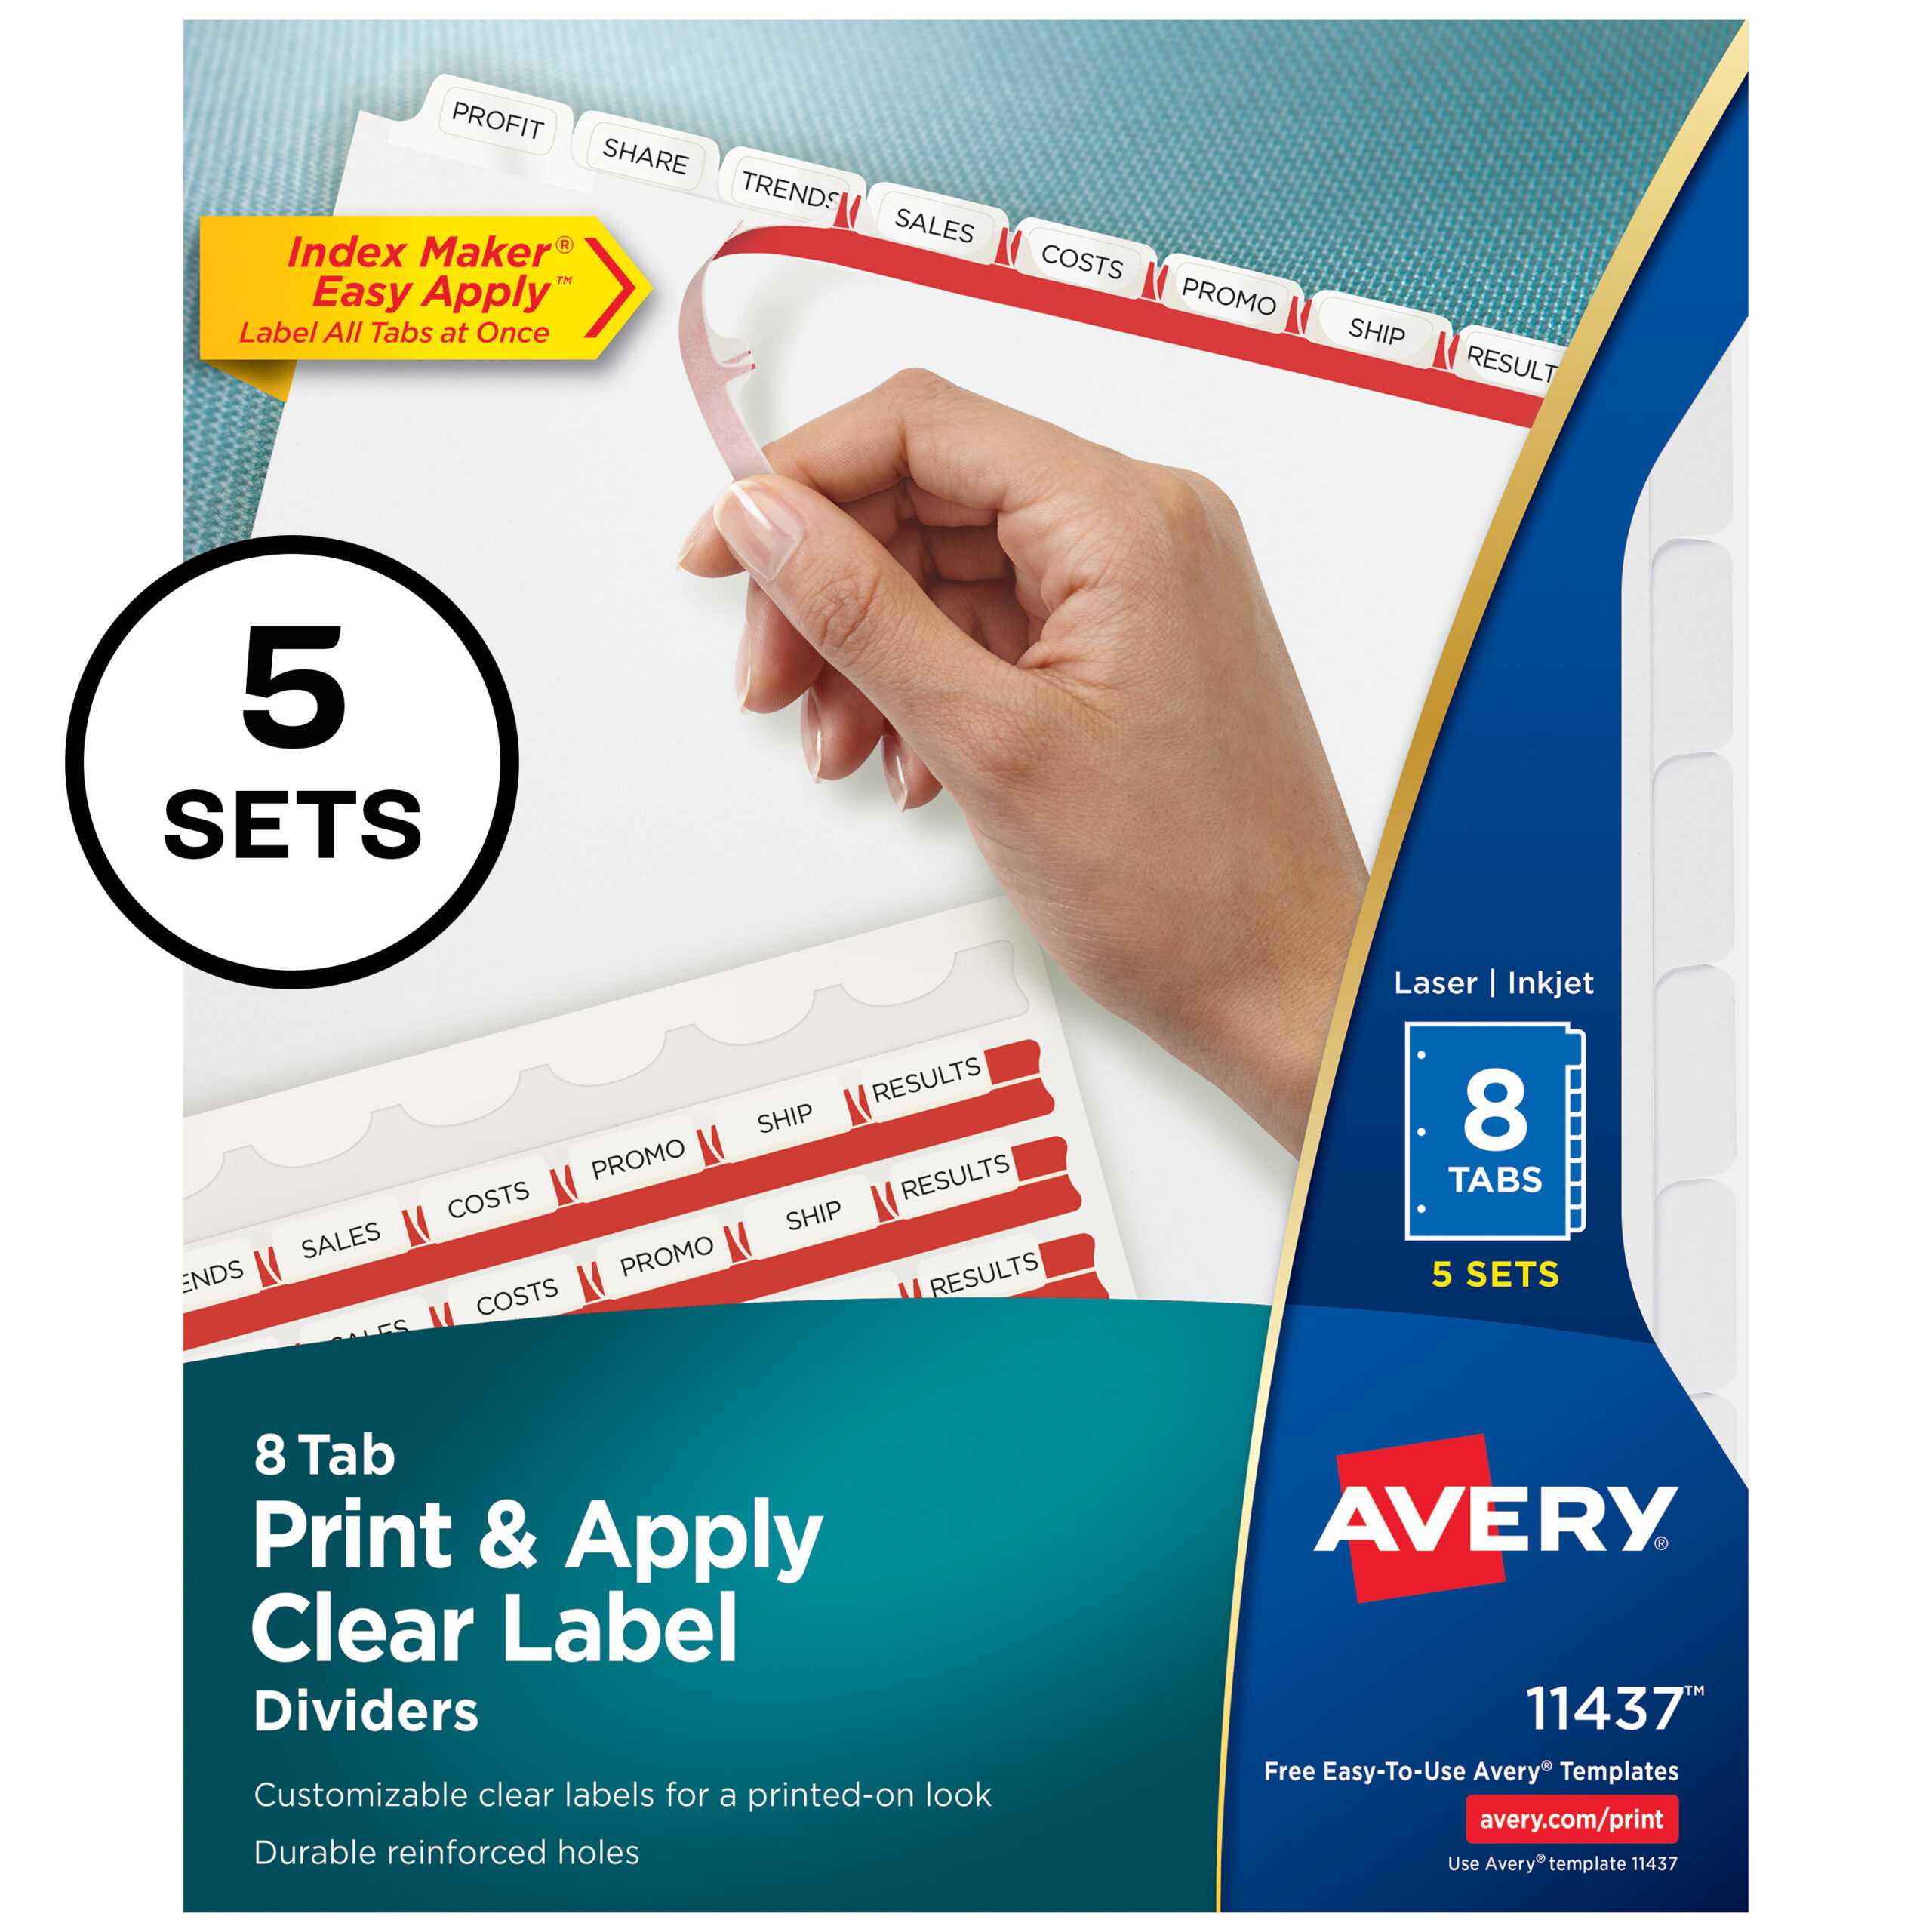 Avery 8 Tab Print & Apply Clear Label Dividers, 5 Sets (11437) – Walmart Inside 8 Tab Divider Template Word